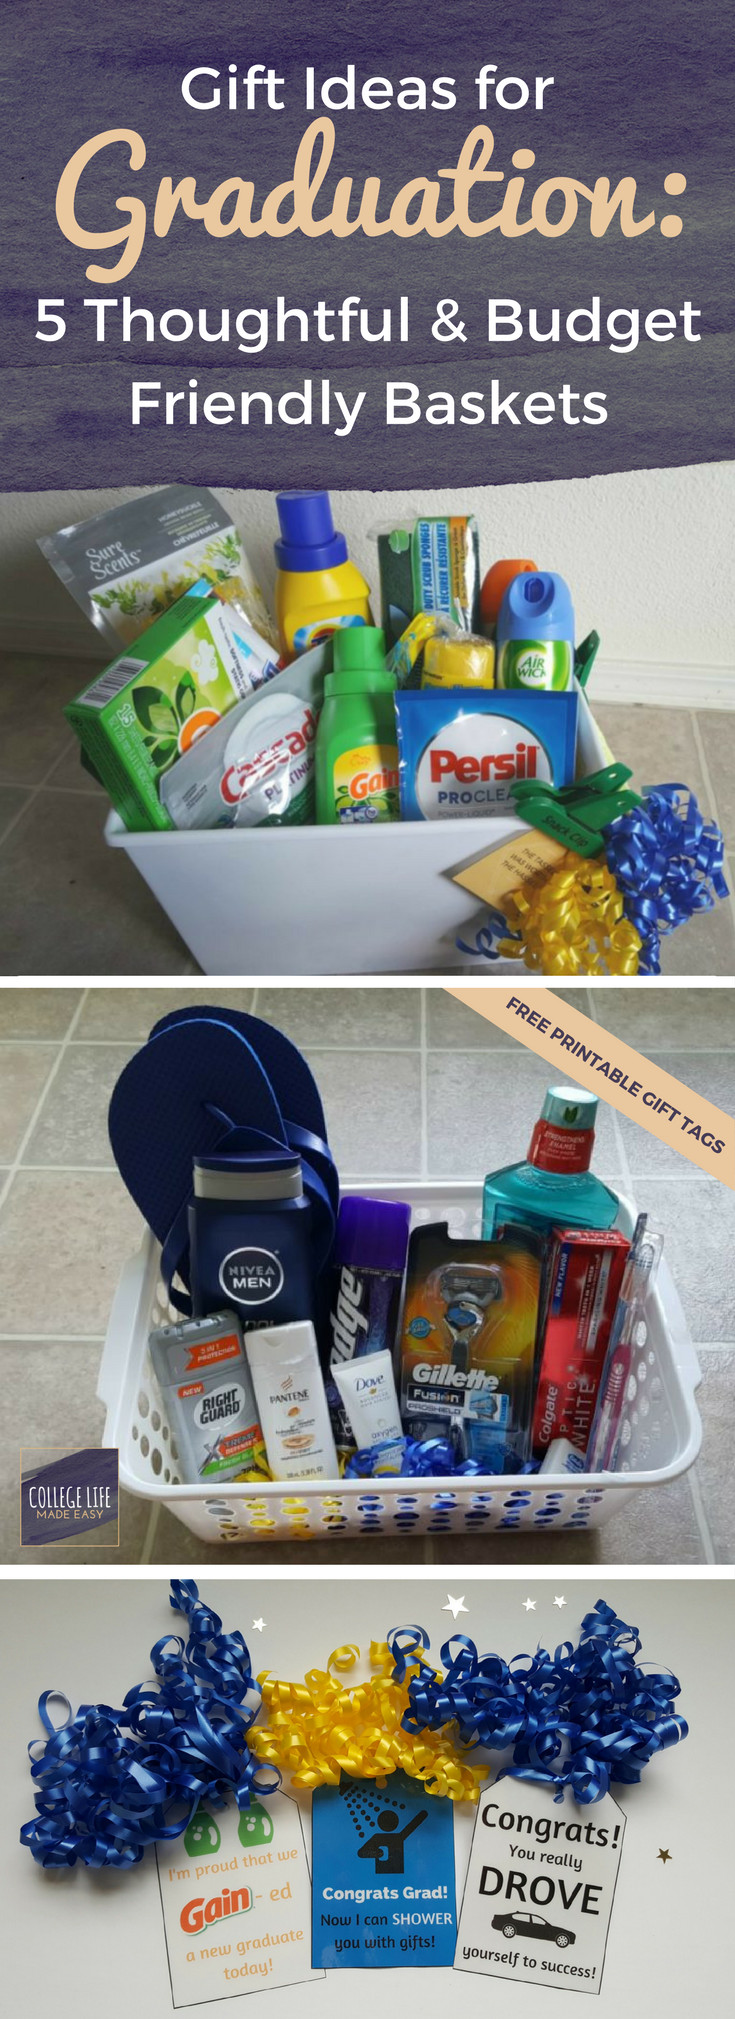 Boys Graduation Gift Ideas
 5 DIY Going Away to College Gift Basket Ideas for Boys